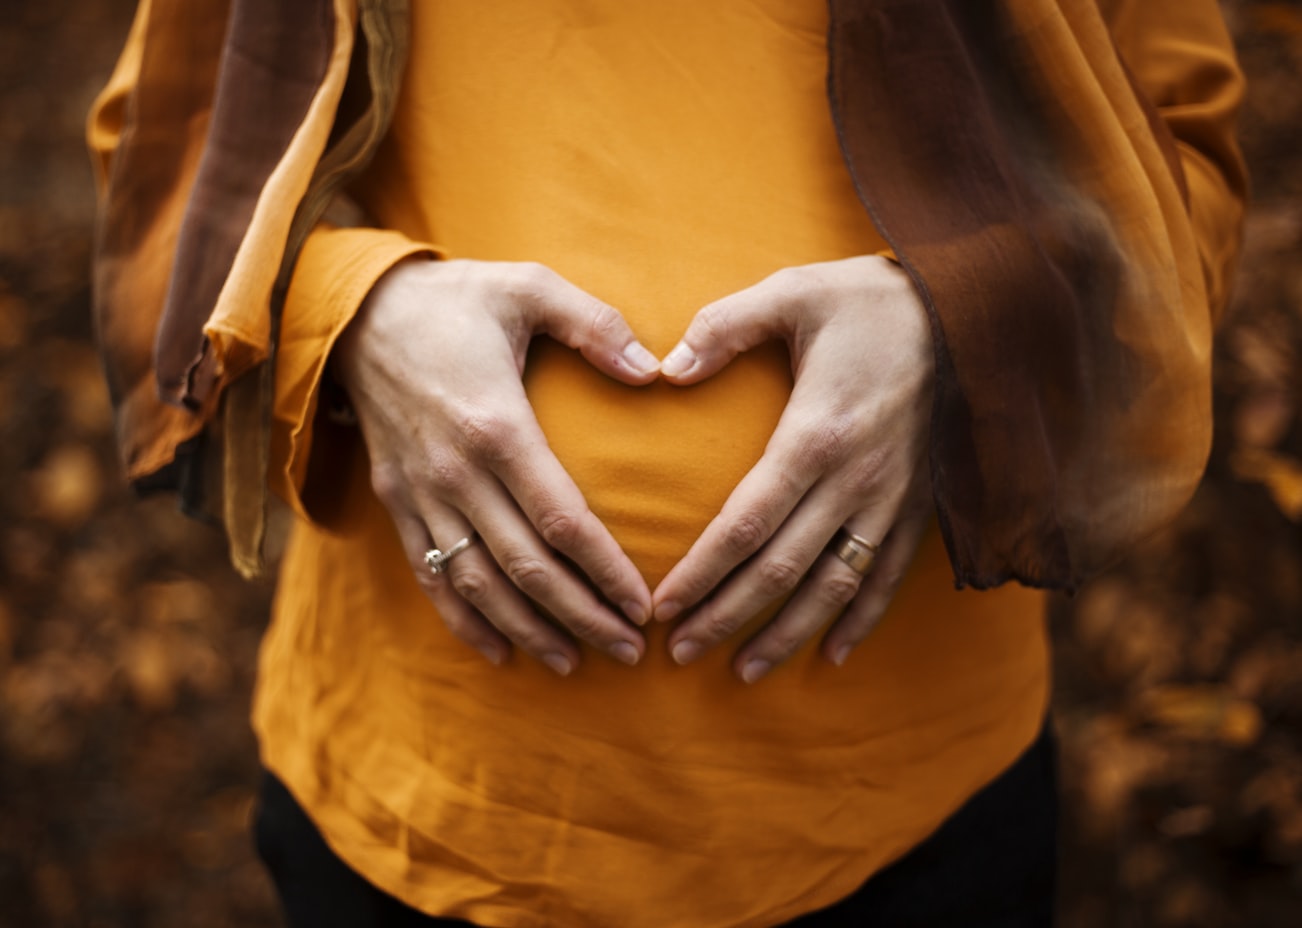 A woman holding her hands in a heart shape over her belly.